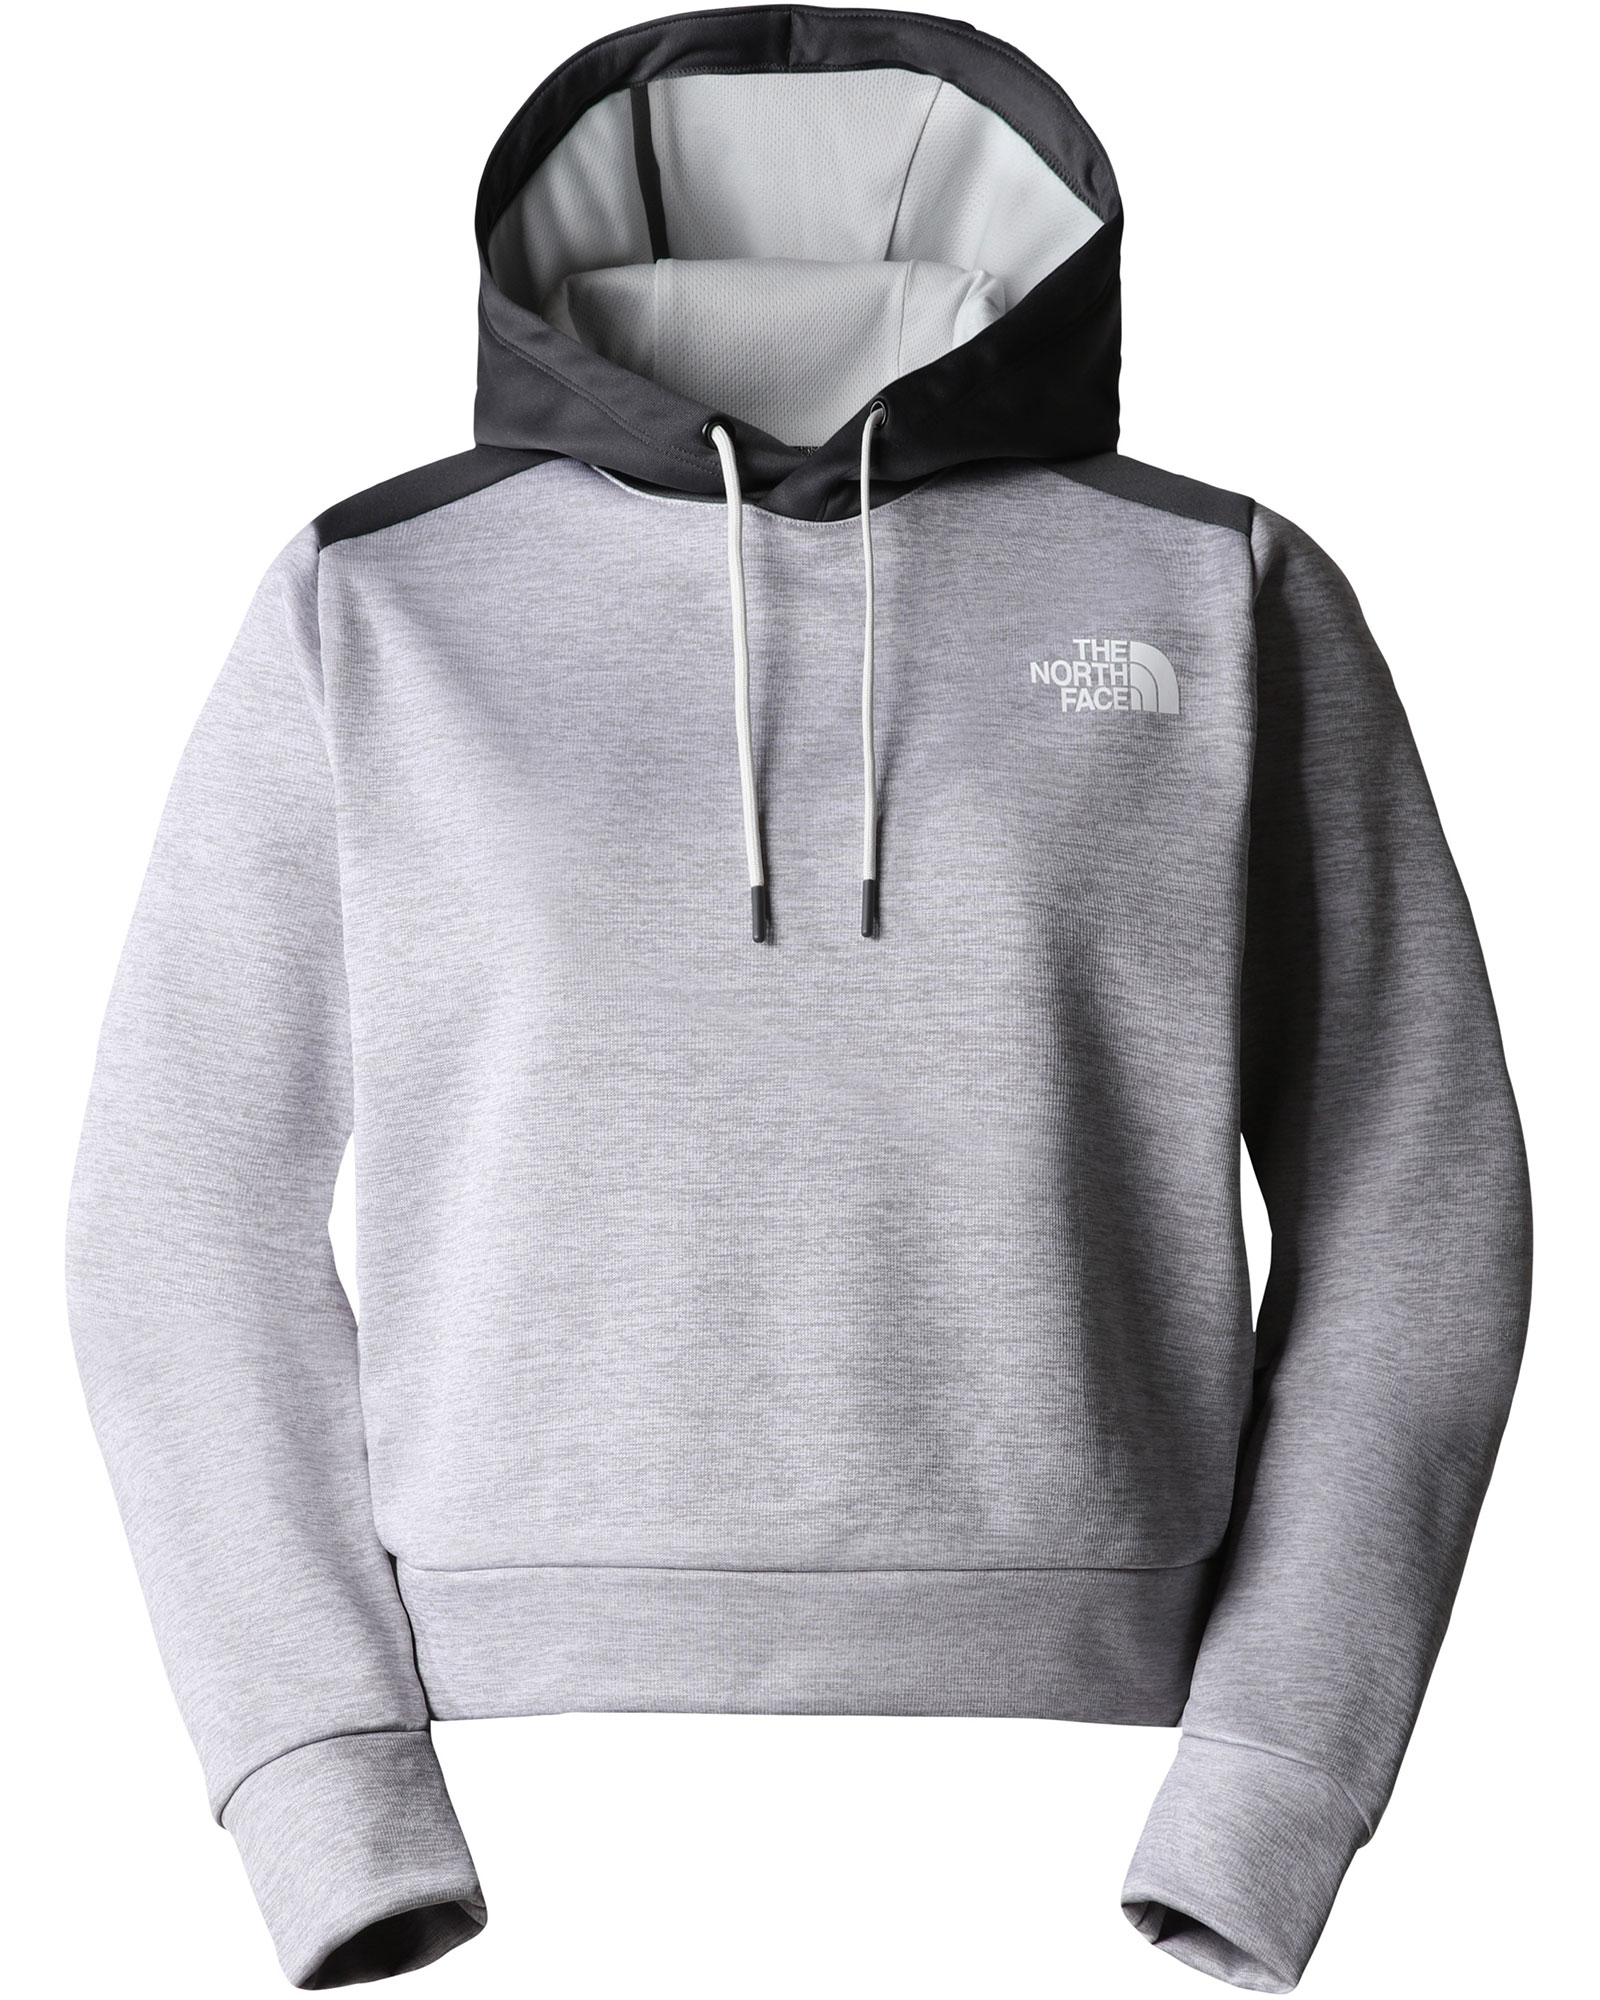 The North Face Reaxion Women’s Fleece Pullover Hoodie - TNF Light Grey Heather XS